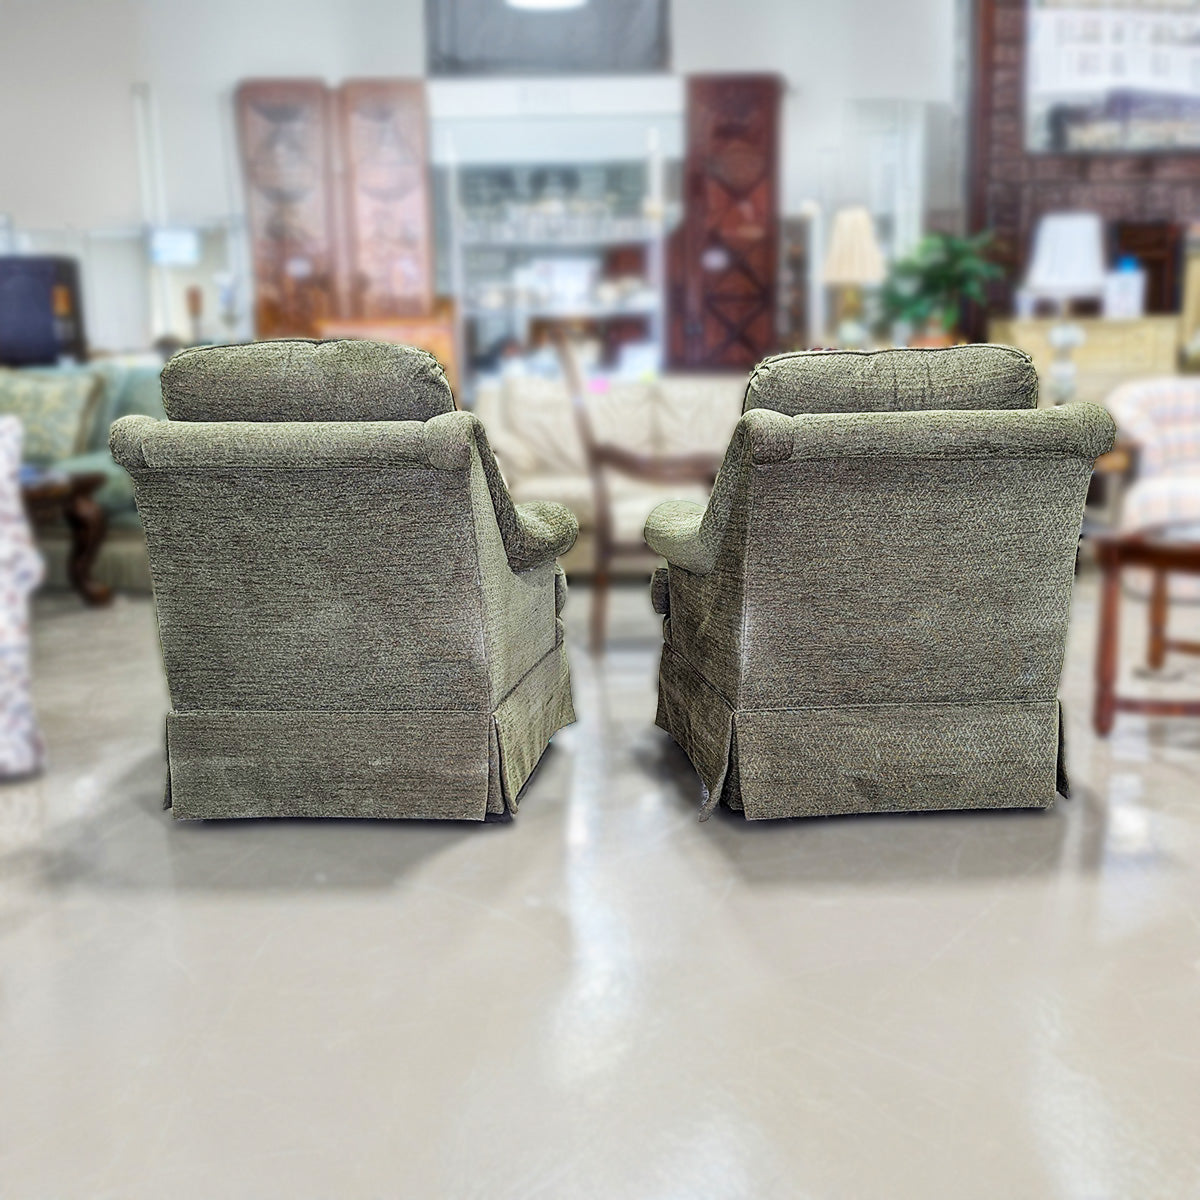 PAIR Large Swivel Forest Green Armchairs - Habroc - Online ReStore